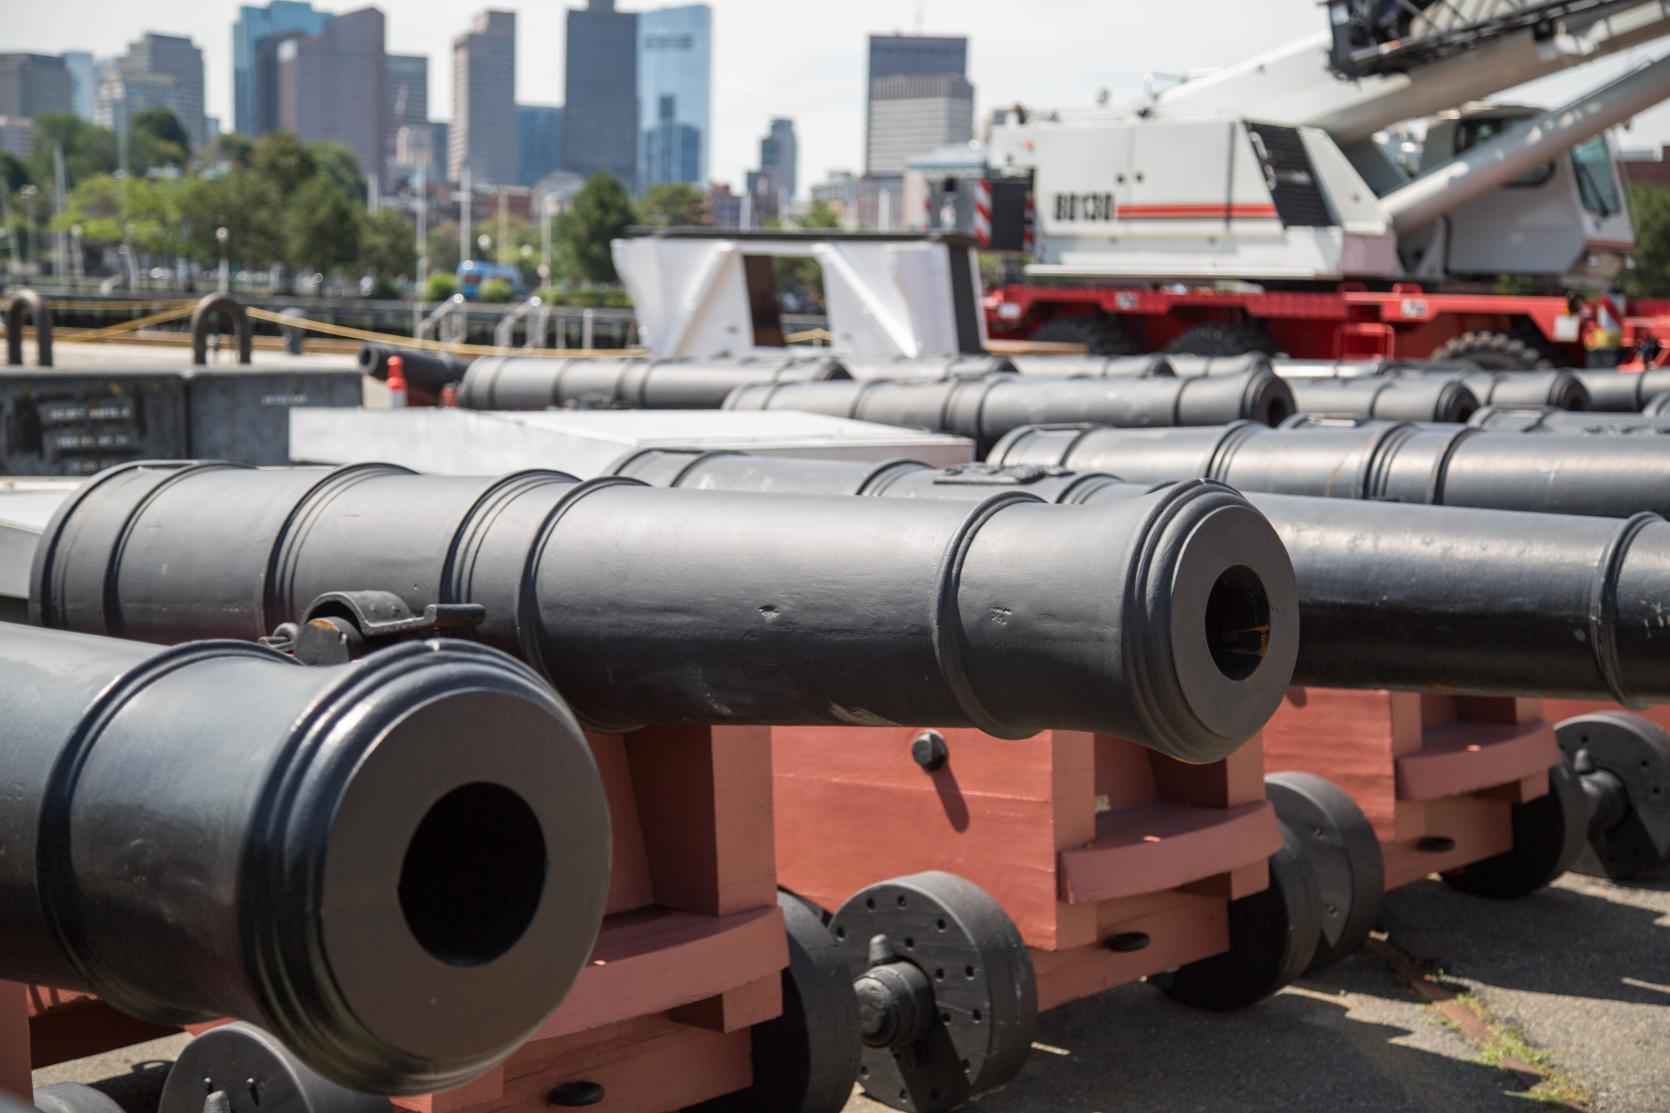 Cannons on the USS Constitution